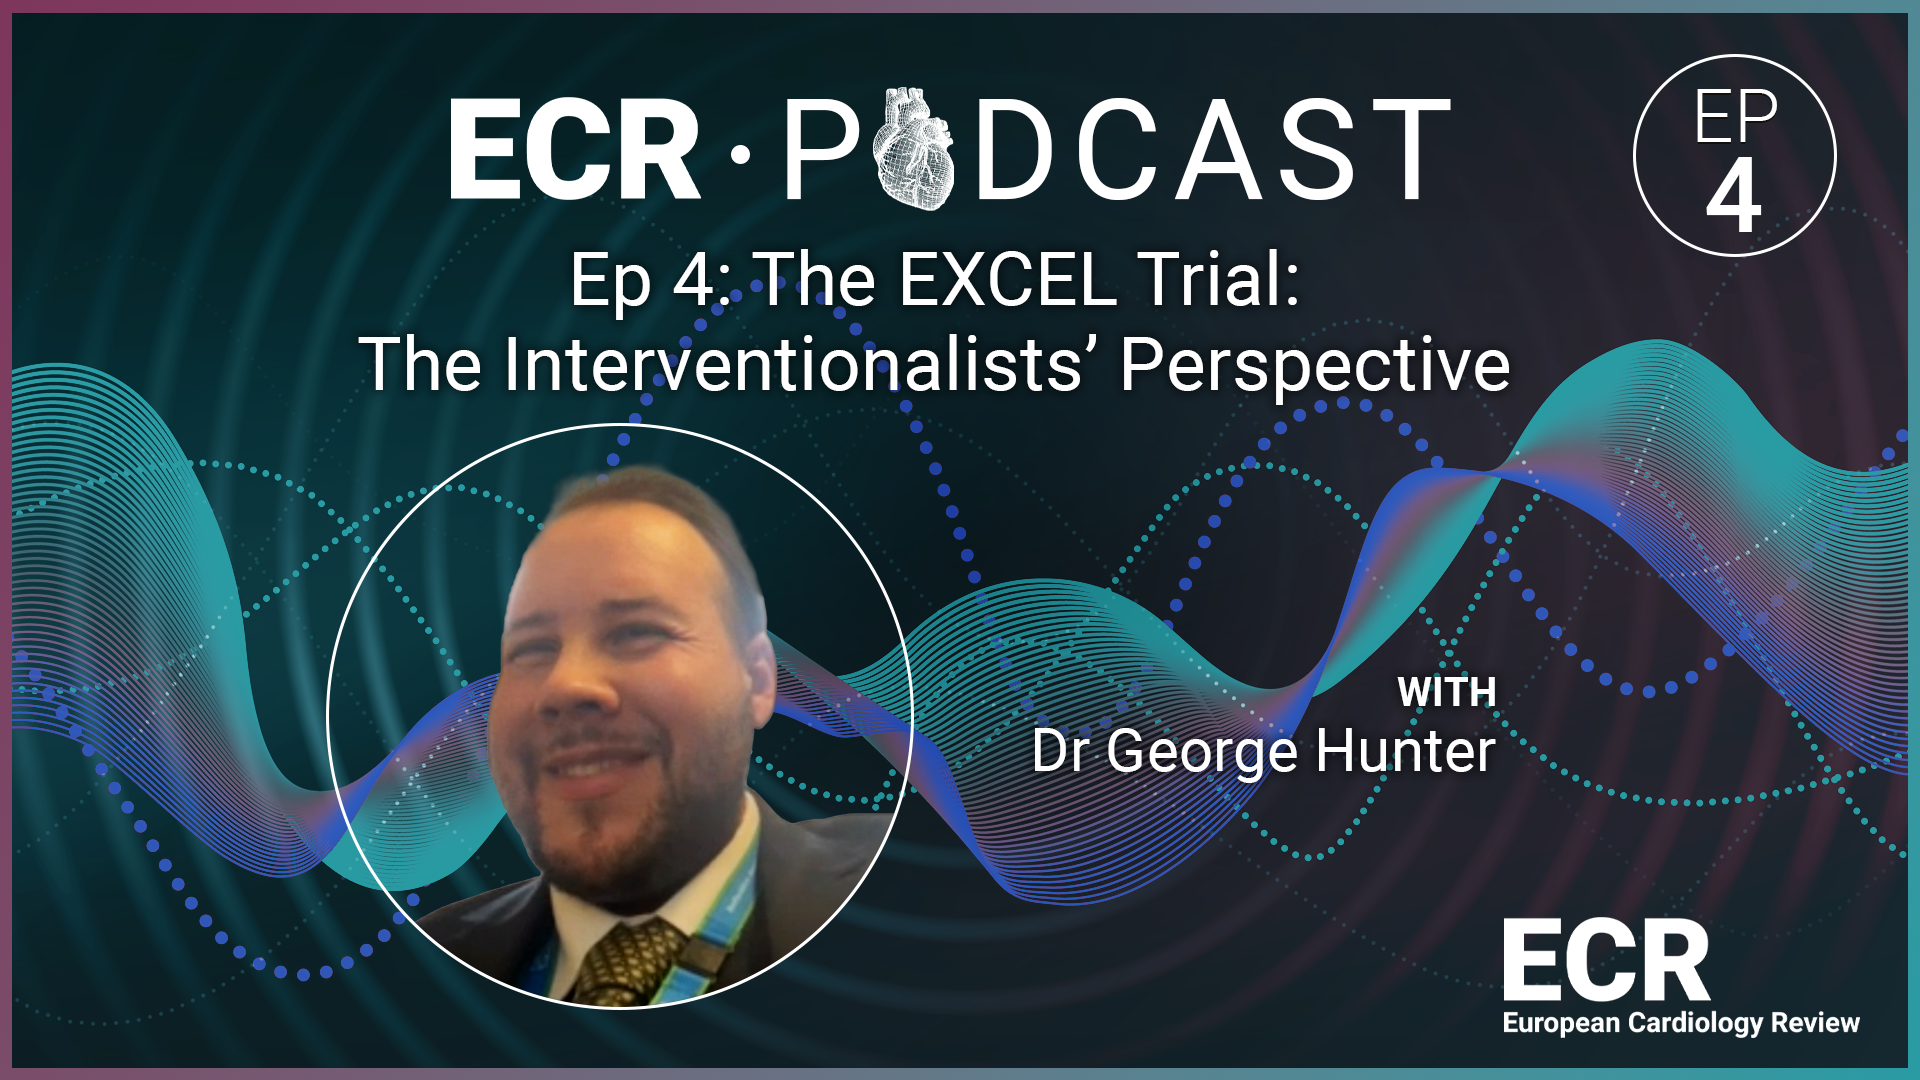 Ep 4: The EXCEL Trial: The Interventionalists’ Perspective